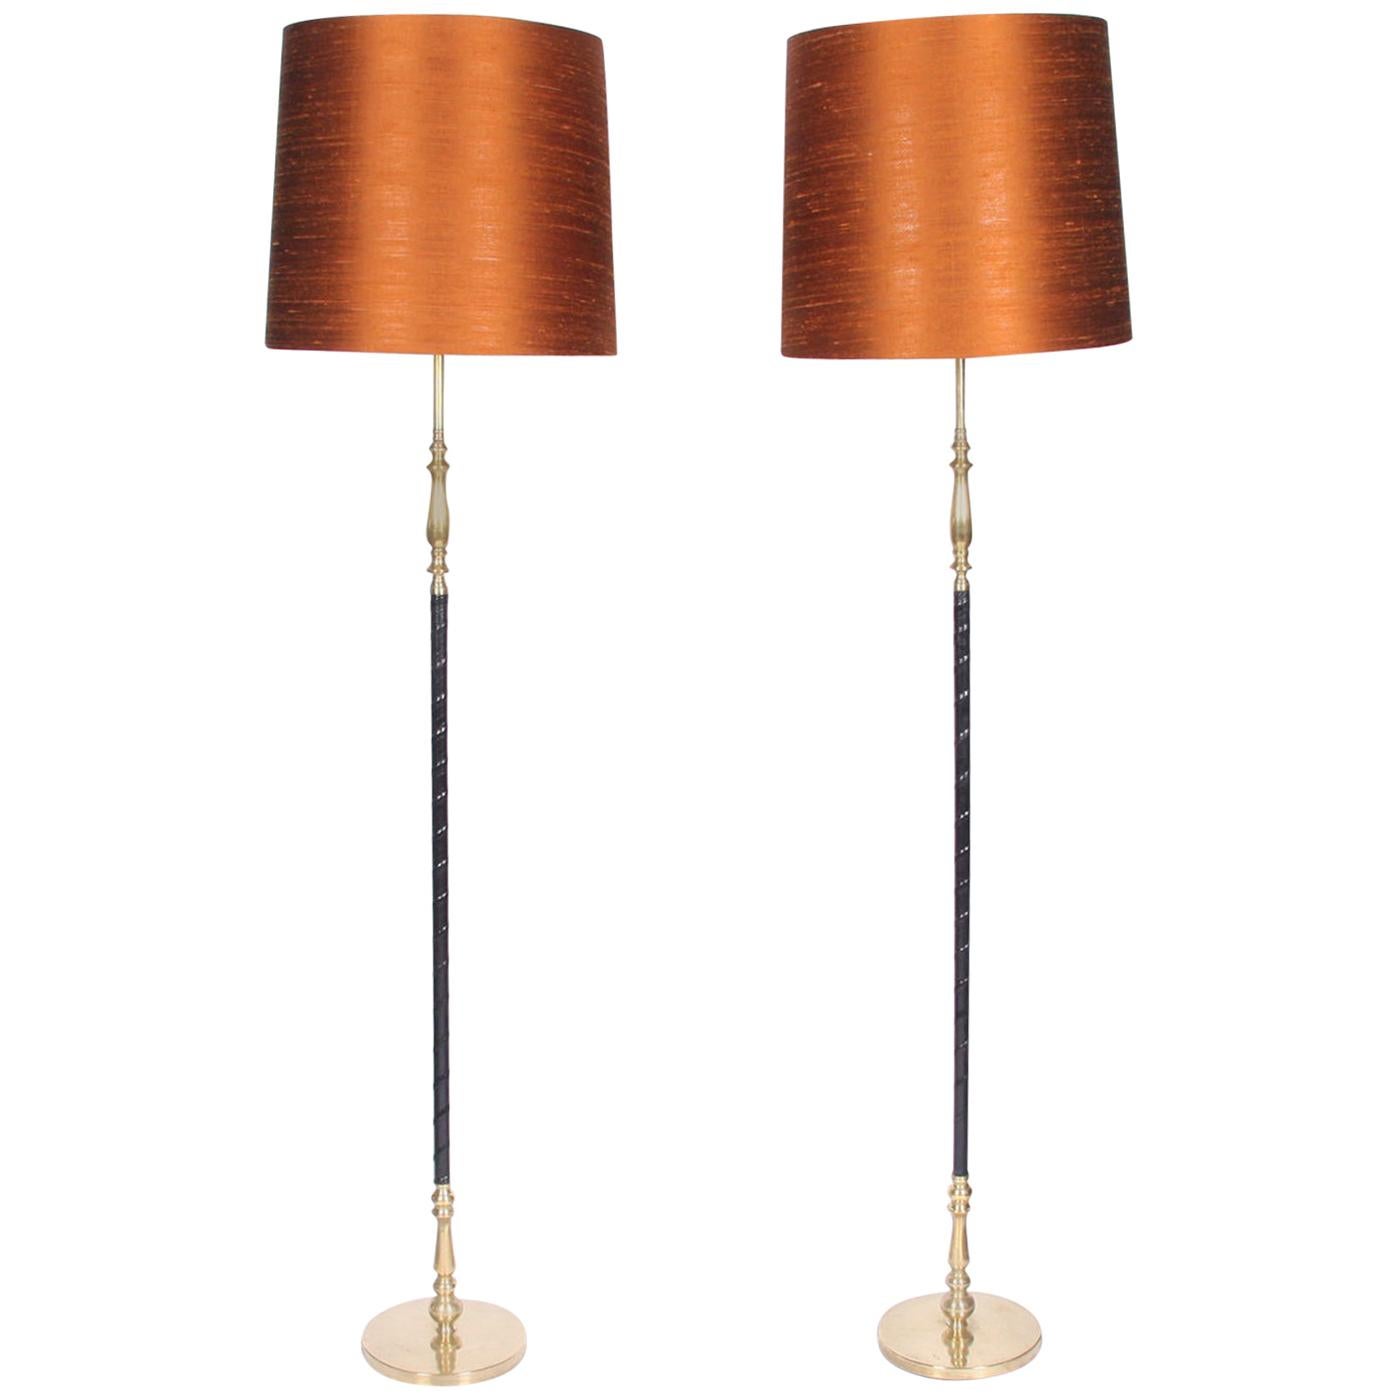 1960s Swedish Pair of Leather and Brass Floor Lamps